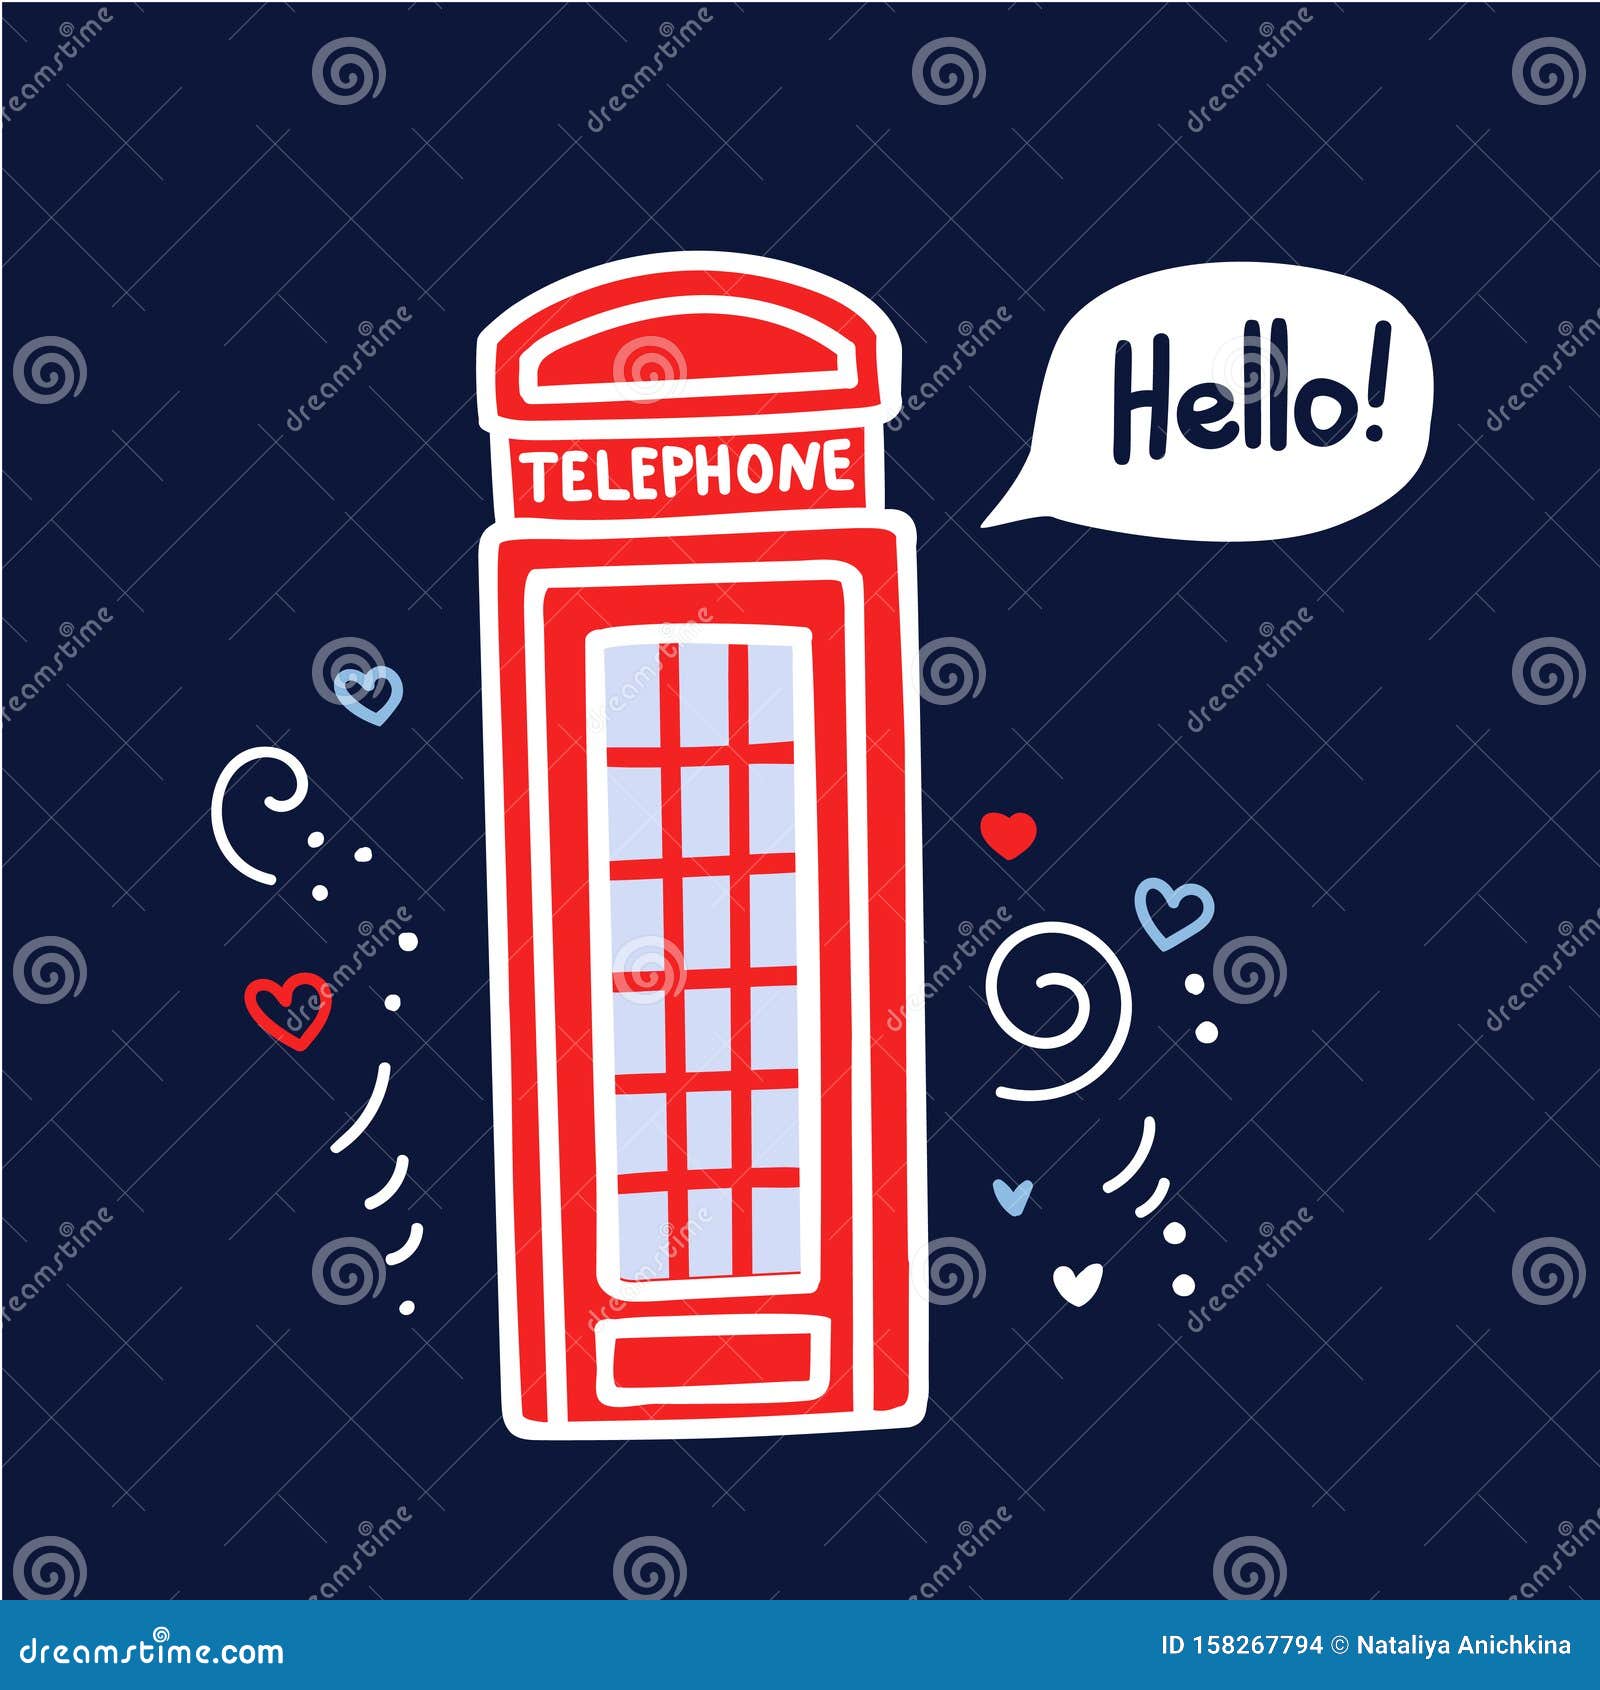 How to Draw Telephones Booth London ☺☎📠🏩😦🤫🤭💕💕❄❄@LBADrawings - YouTube